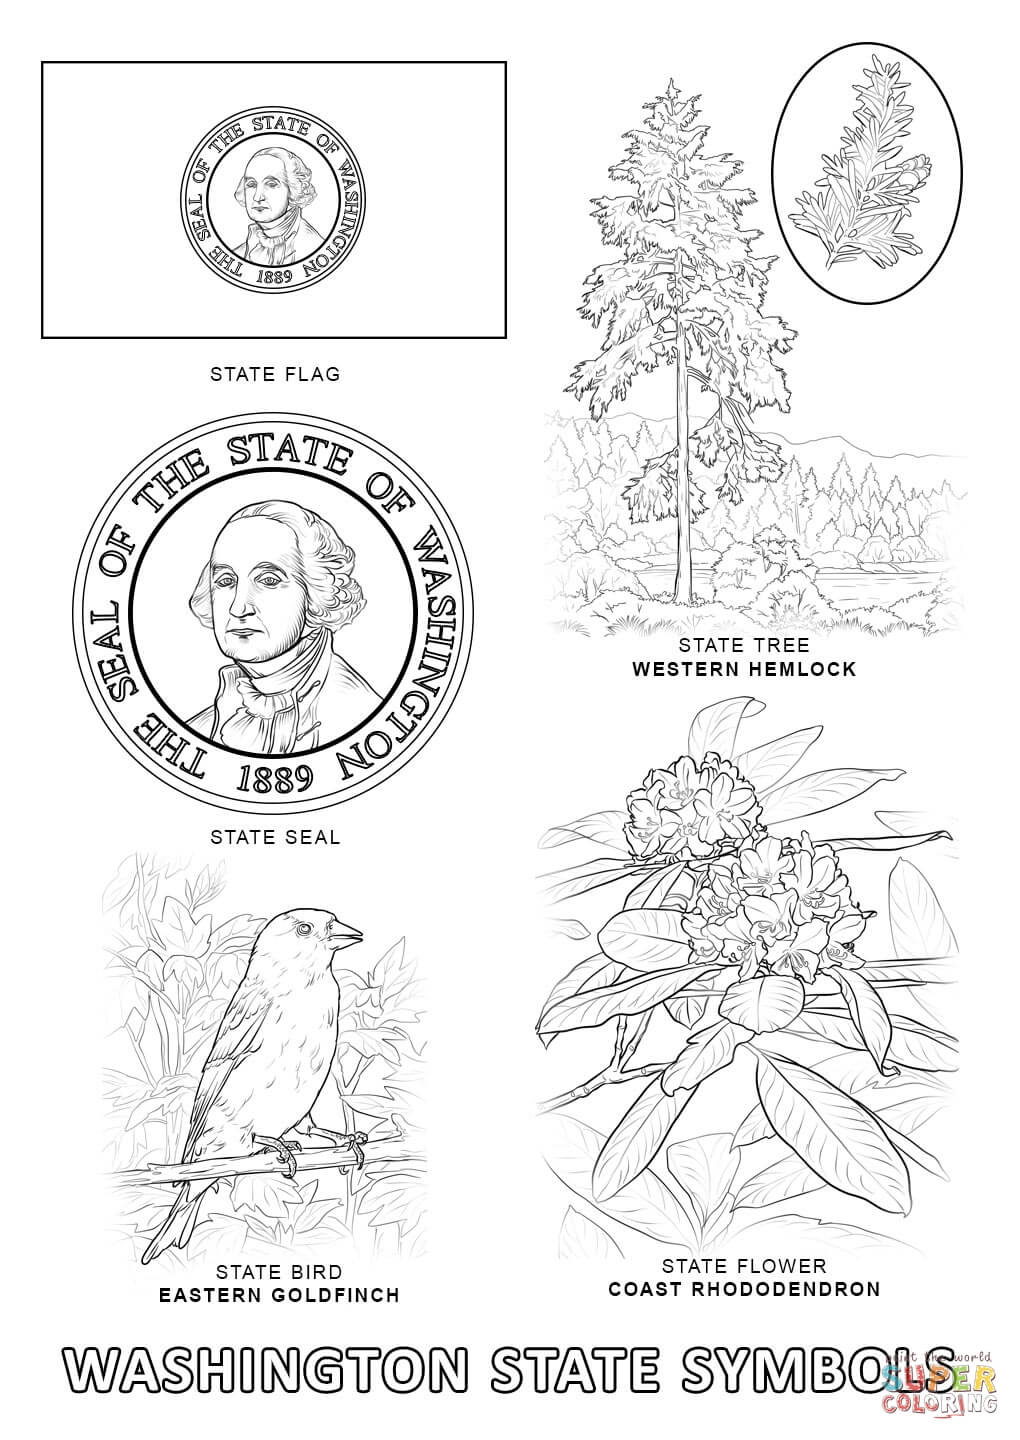 Washington State Symbols coloring page | Free Printable Coloring Pages